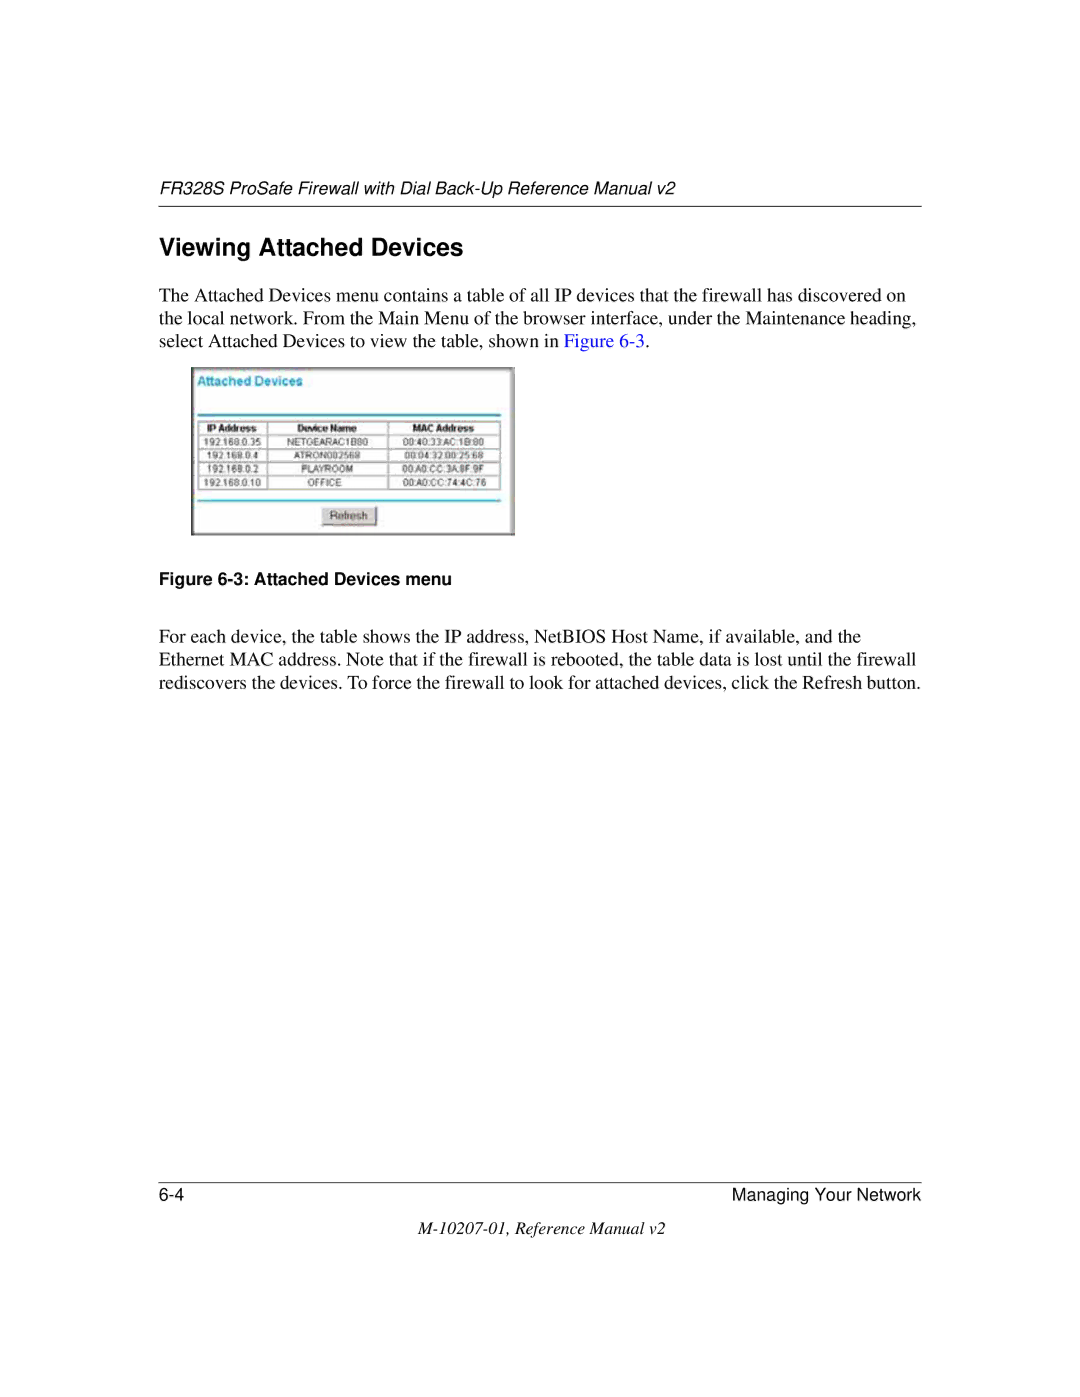 NETGEAR FR328S manual Viewing Attached Devices, Attached Devices menu 